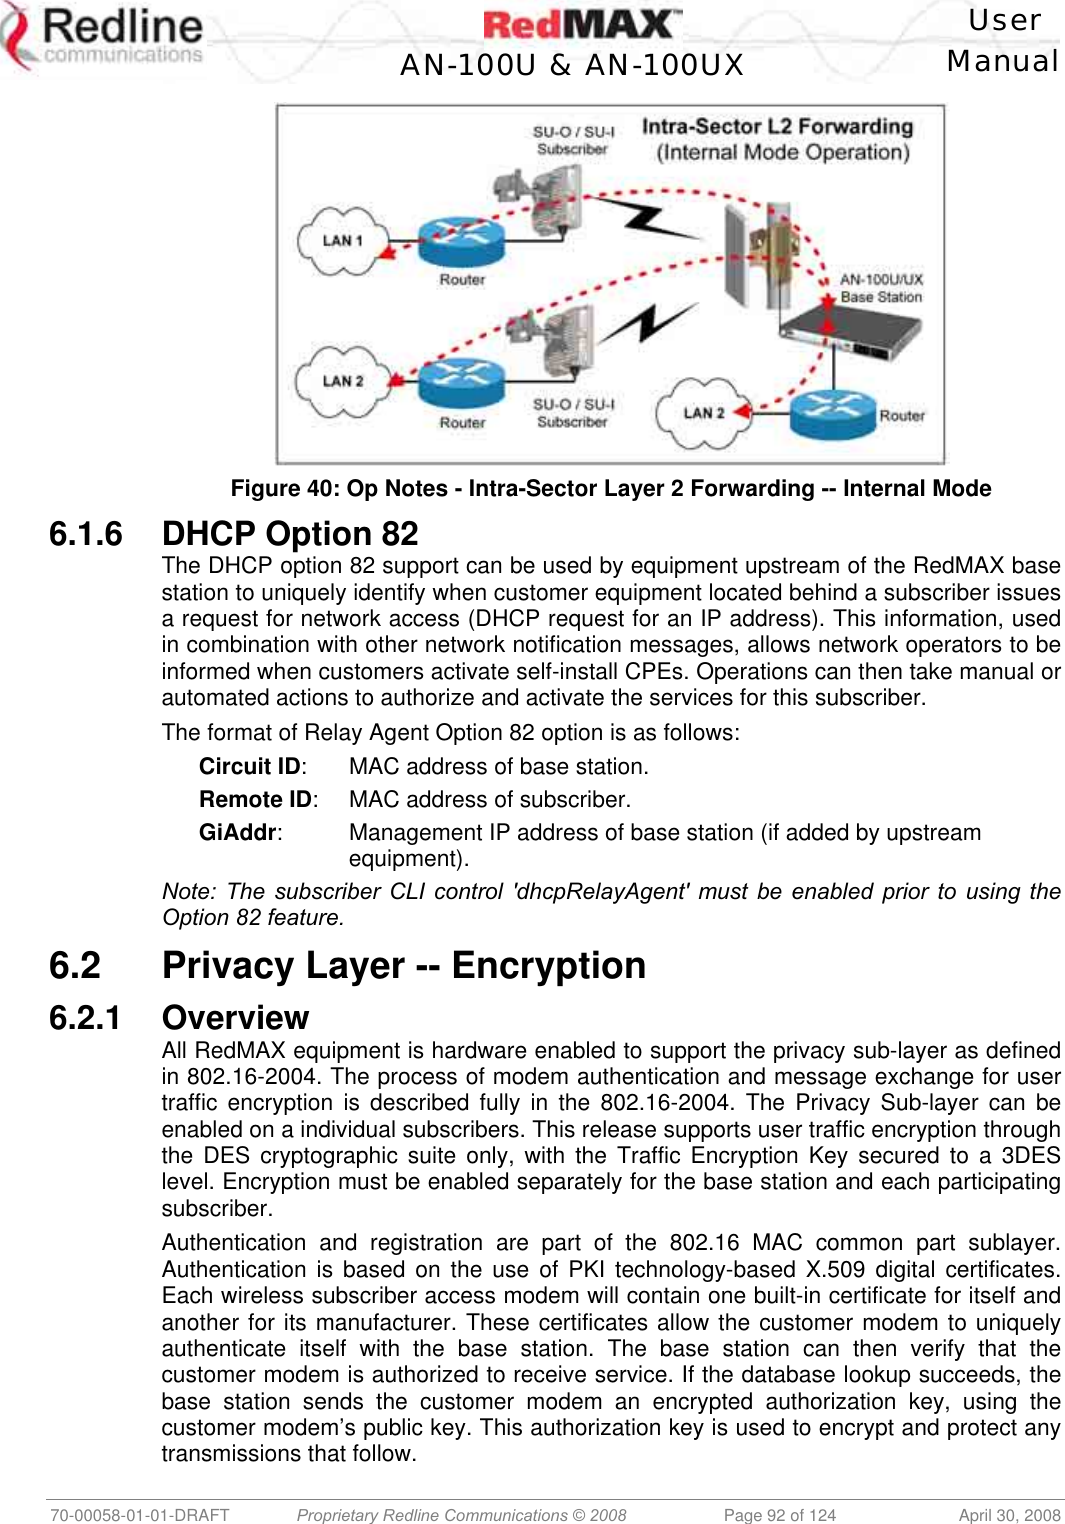    User  AN-100U &amp; AN-100UX Manual   70-00058-01-01-DRAFT  Proprietary Redline Communications © 2008   Page 92 of 124  April 30, 2008  Figure 40: Op Notes - Intra-Sector Layer 2 Forwarding -- Internal Mode 6.1.6 DHCP Option 82 The DHCP option 82 support can be used by equipment upstream of the RedMAX base station to uniquely identify when customer equipment located behind a subscriber issues a request for network access (DHCP request for an IP address). This information, used in combination with other network notification messages, allows network operators to be informed when customers activate self-install CPEs. Operations can then take manual or automated actions to authorize and activate the services for this subscriber. The format of Relay Agent Option 82 option is as follows: Circuit ID:  MAC address of base station. Remote ID:  MAC address of subscriber. GiAddr:  Management IP address of base station (if added by upstream equipment). Note: The subscriber CLI control &apos;dhcpRelayAgent&apos; must be enabled prior to using the Option 82 feature.  6.2  Privacy Layer -- Encryption 6.2.1 Overview All RedMAX equipment is hardware enabled to support the privacy sub-layer as defined in 802.16-2004. The process of modem authentication and message exchange for user traffic encryption is described fully in the 802.16-2004. The Privacy Sub-layer can be enabled on a individual subscribers. This release supports user traffic encryption through the DES cryptographic suite only, with the Traffic Encryption Key secured to a 3DES level. Encryption must be enabled separately for the base station and each participating subscriber. Authentication and registration are part of the 802.16 MAC common part sublayer. Authentication is based on the use of PKI technology-based X.509 digital certificates. Each wireless subscriber access modem will contain one built-in certificate for itself and another for its manufacturer. These certificates allow the customer modem to uniquely authenticate itself with the base station. The base station can then verify that the customer modem is authorized to receive service. If the database lookup succeeds, the base station sends the customer modem an encrypted authorization key, using the customer modem’s public key. This authorization key is used to encrypt and protect any transmissions that follow.  